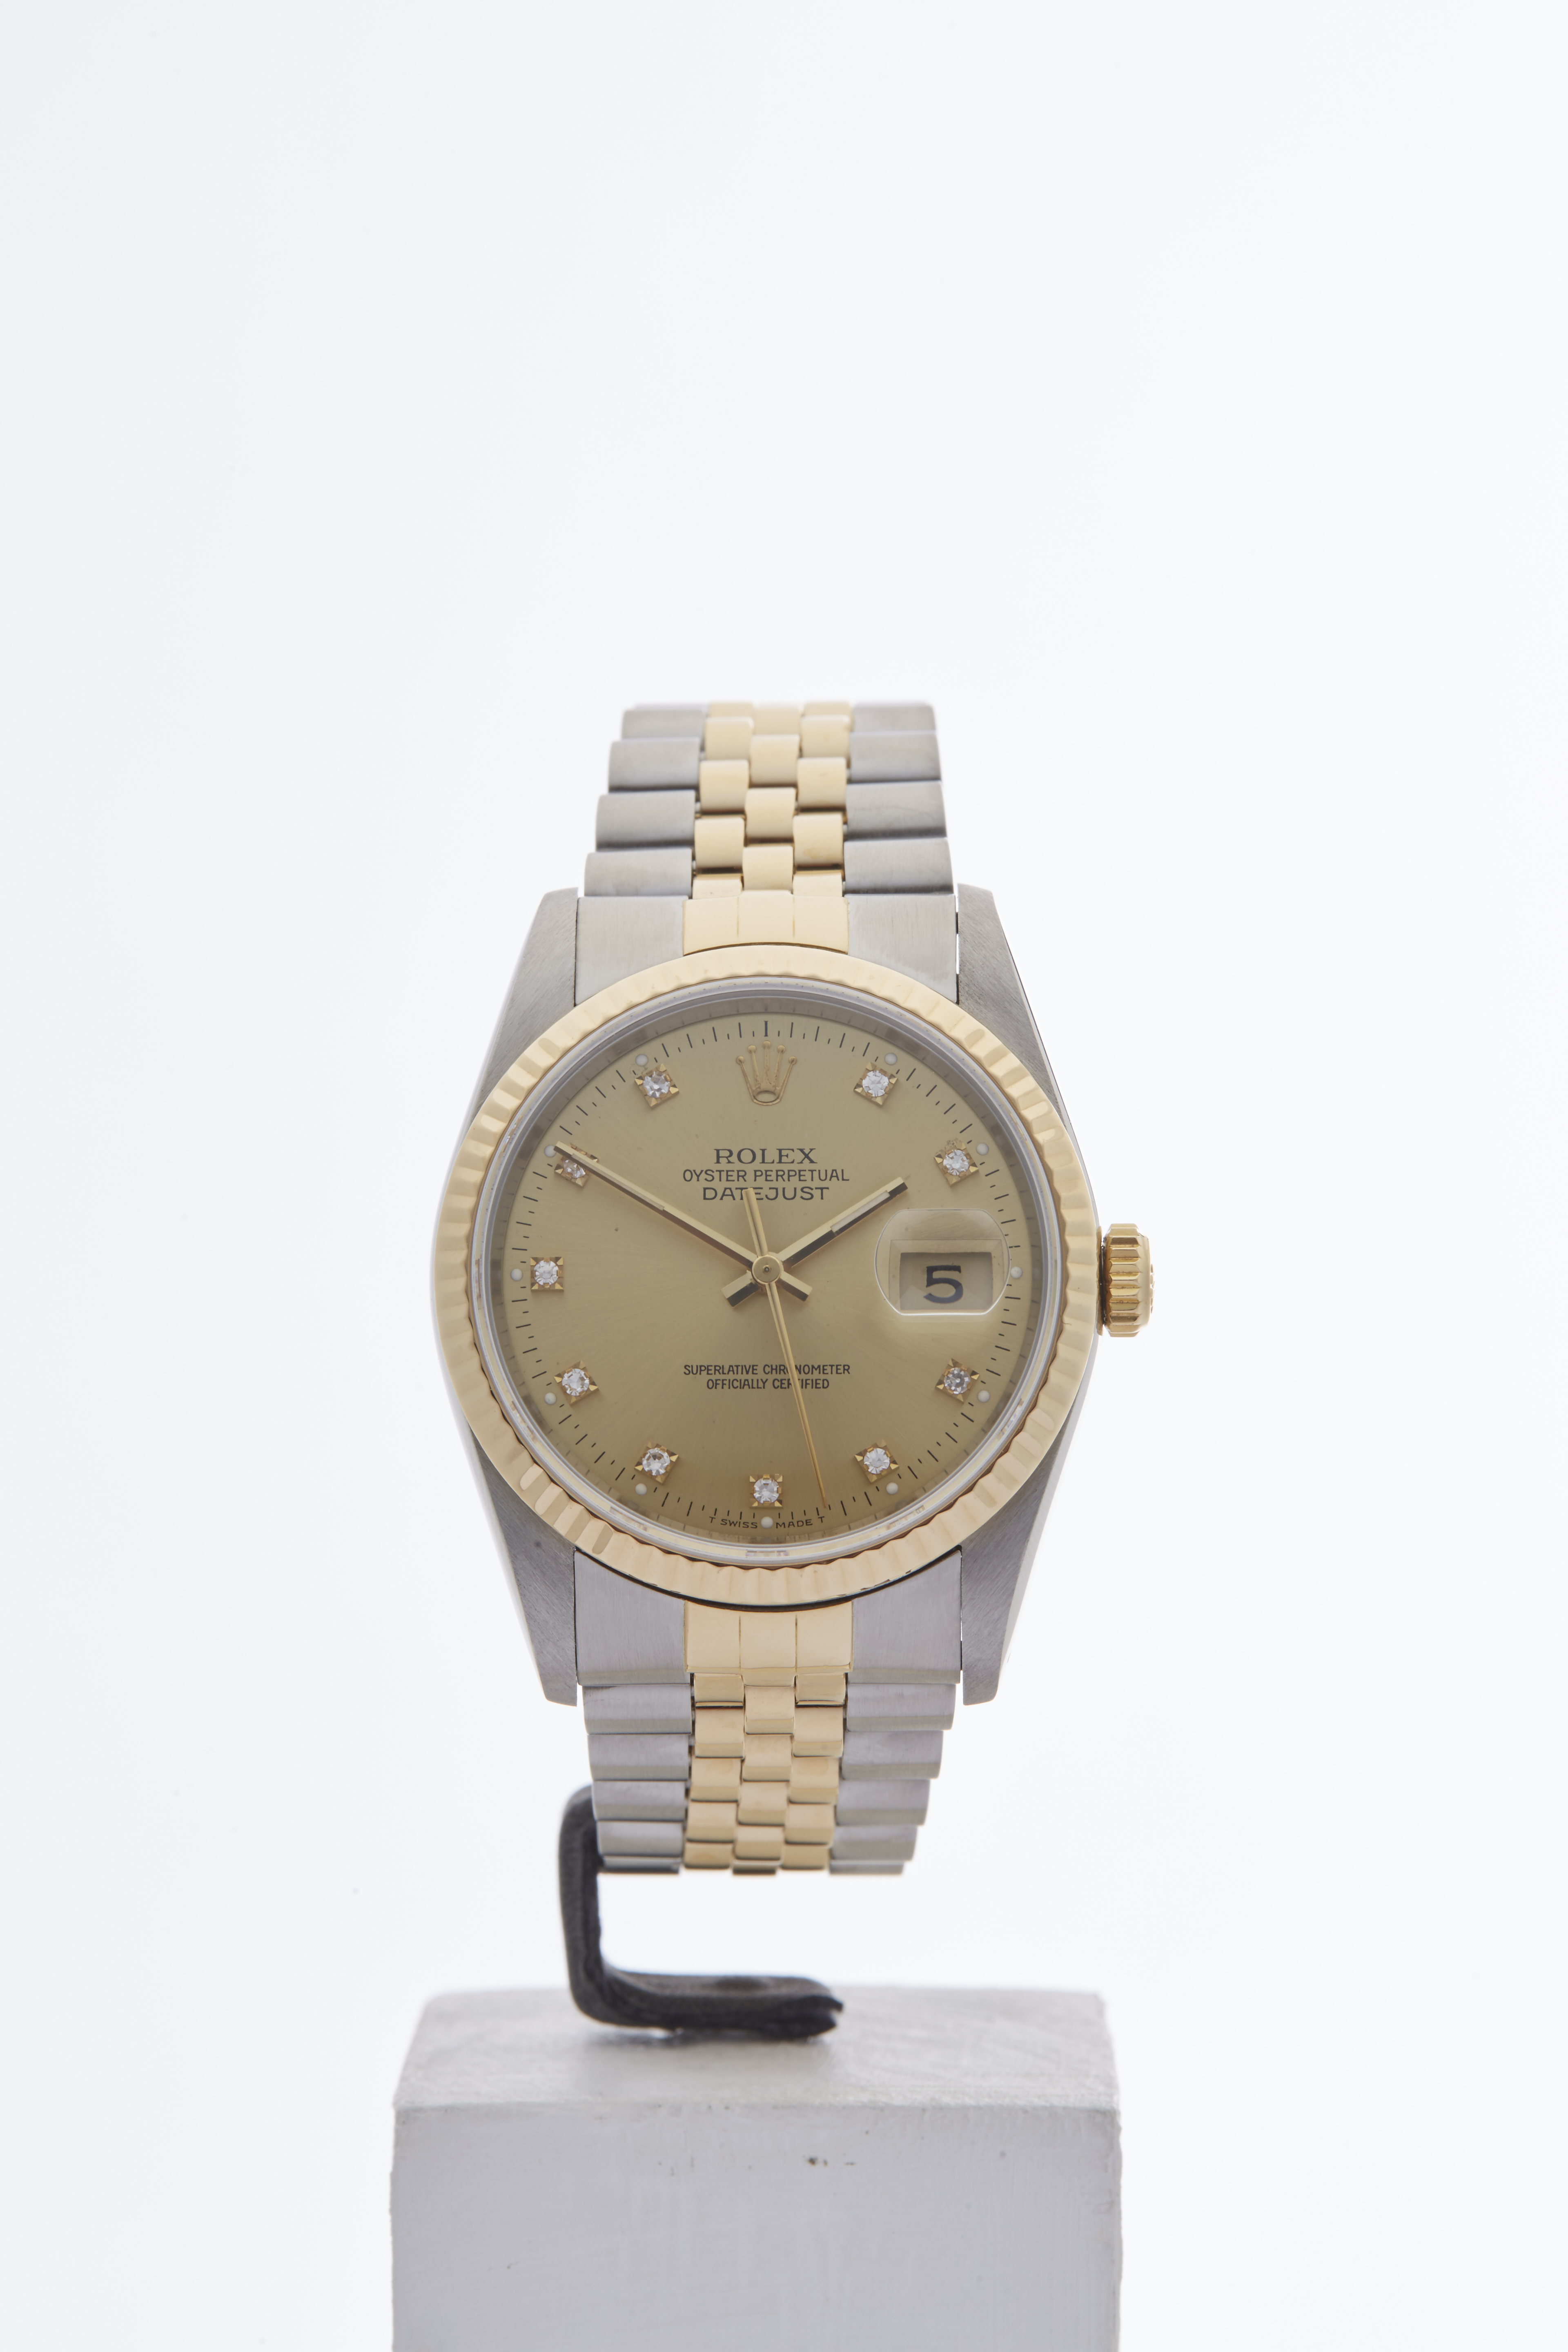 Rolex Datejust 36mm Stainless Steel & 18k Yellow Gold 16233 - Image 15 of 23